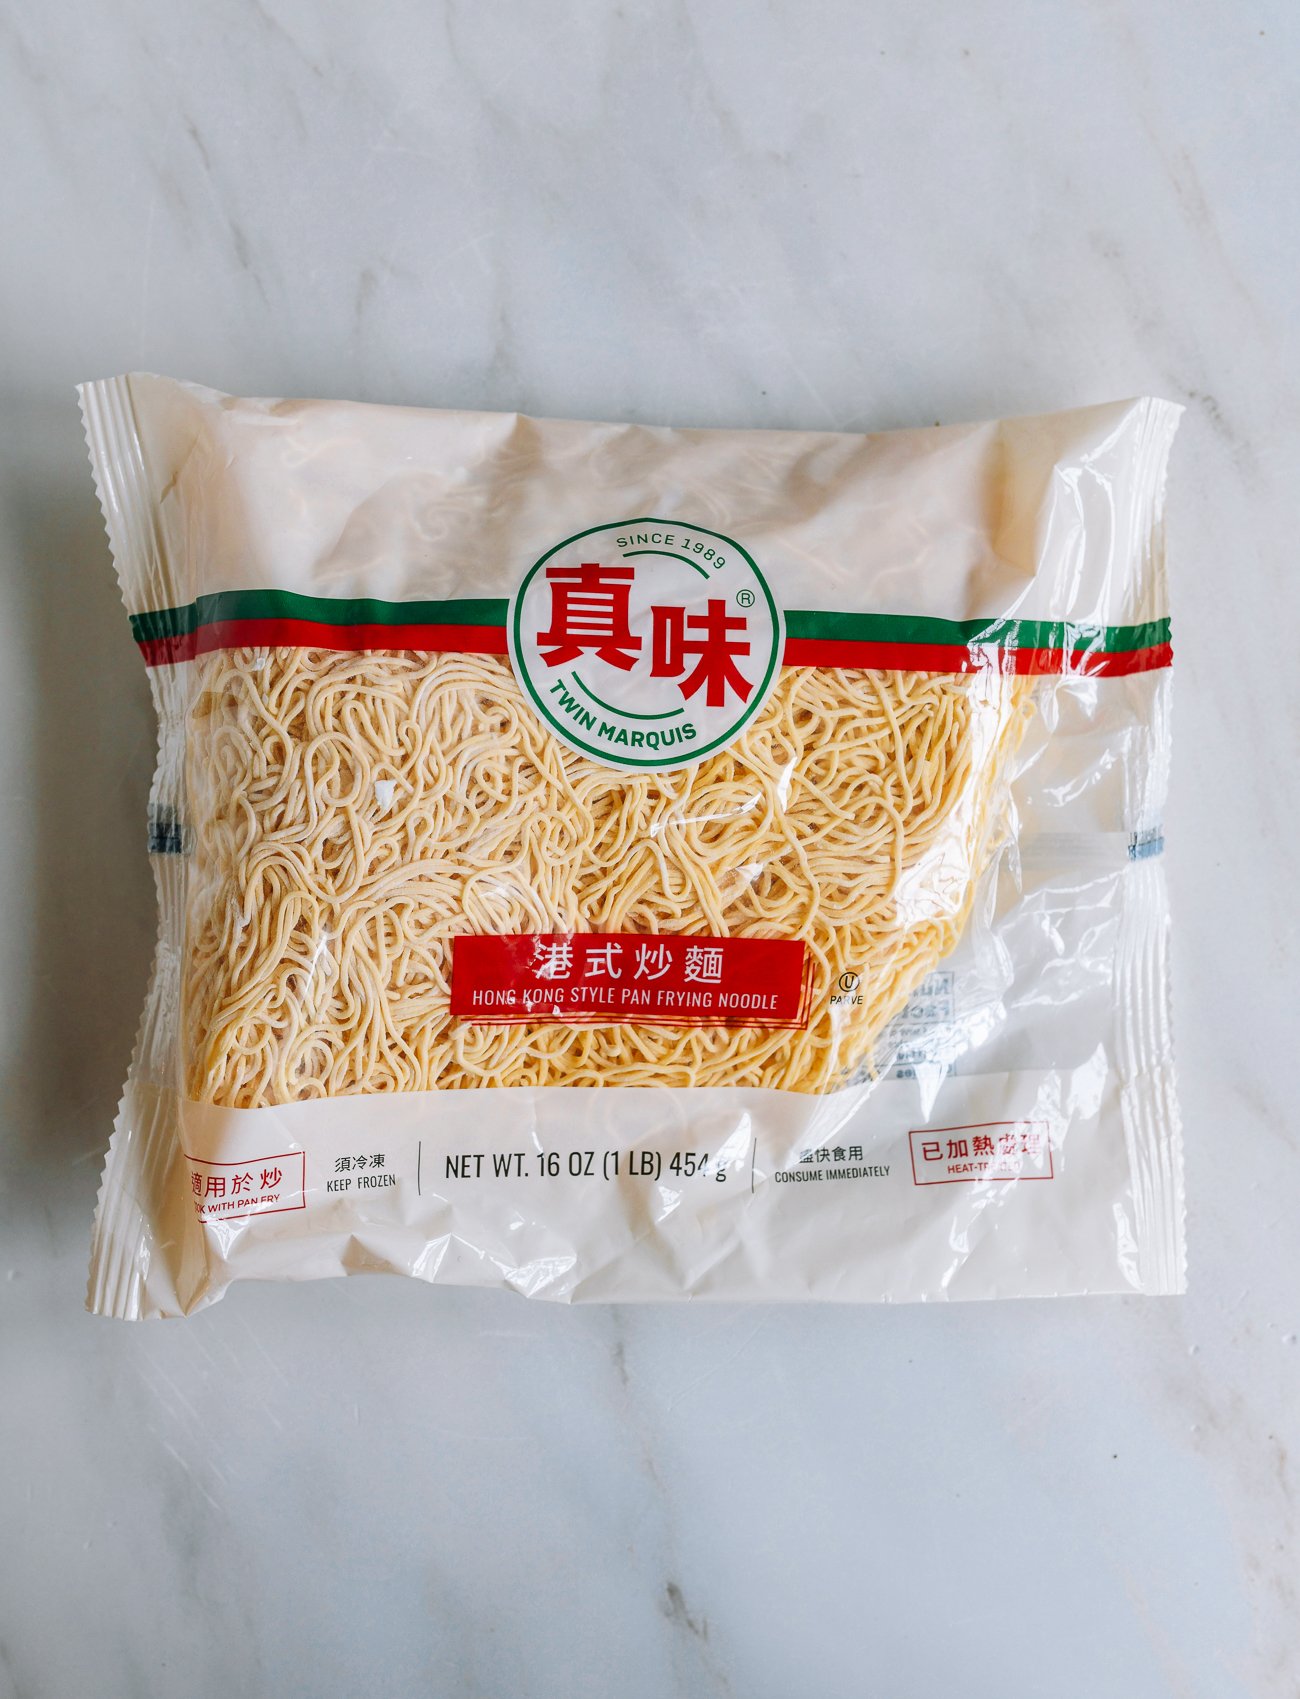 fresh hong kong style noodles for pan-frying